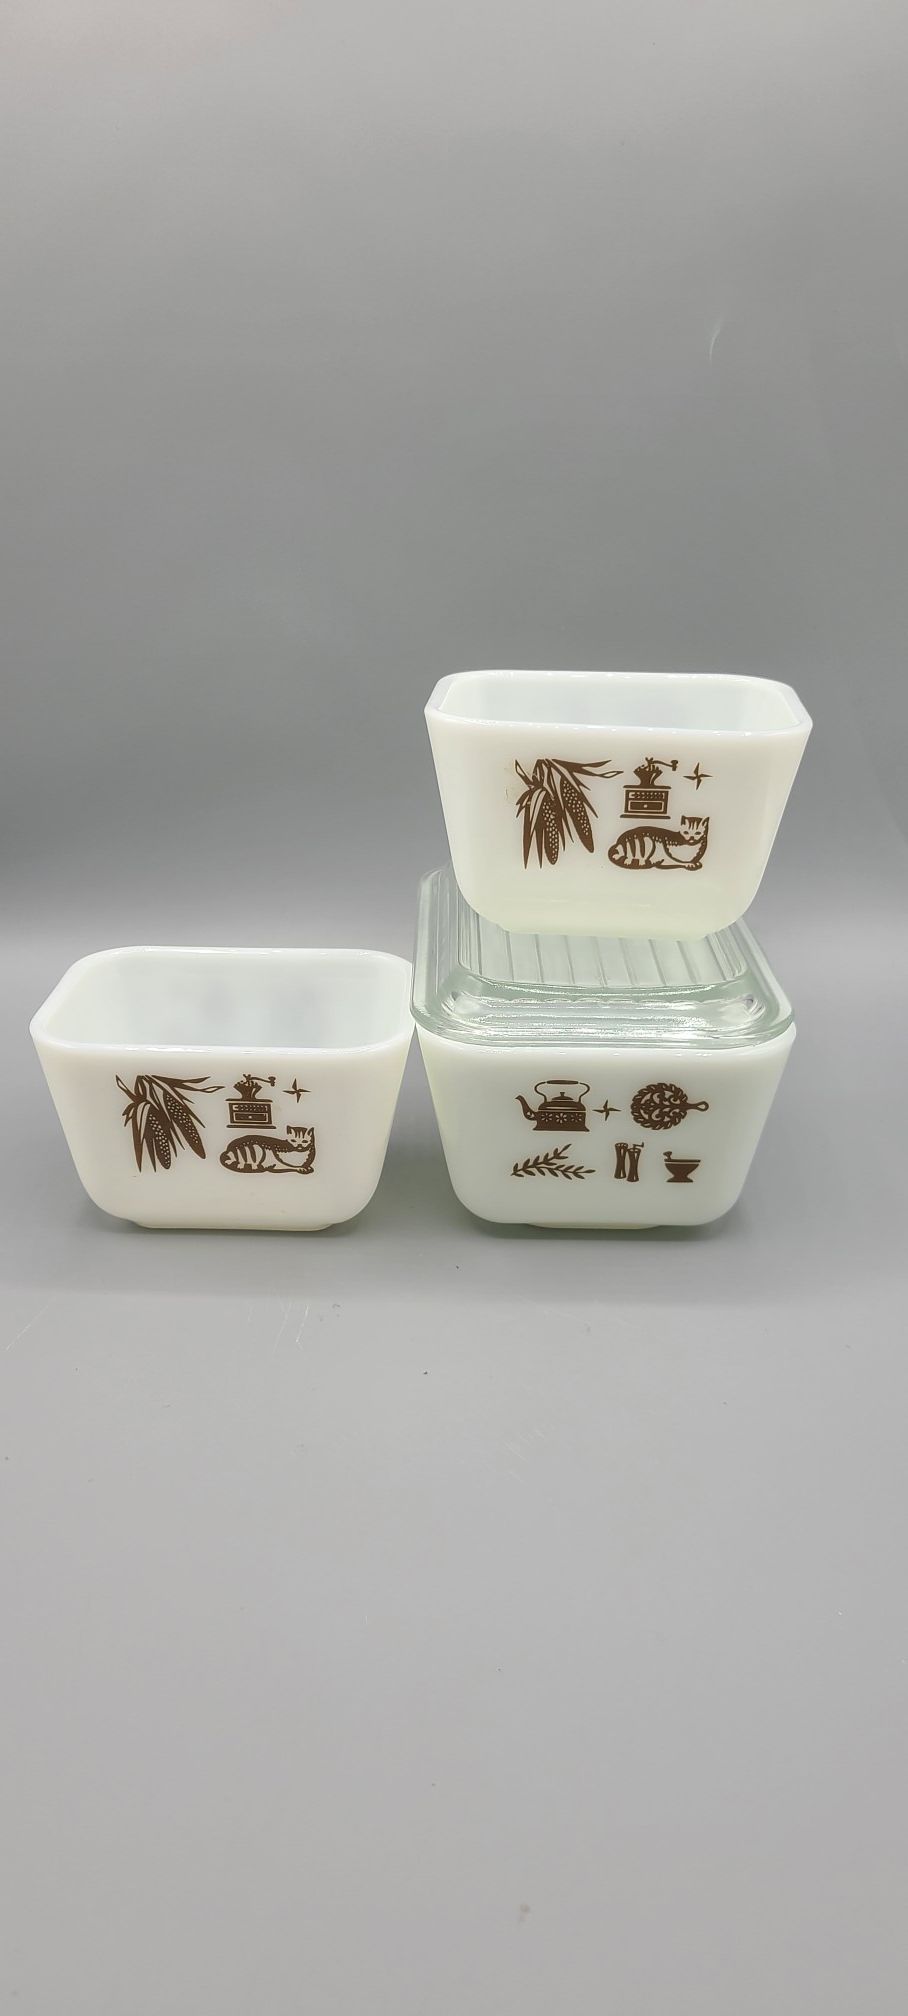 Vintage Pyrex refrigerator dishes in Early American pattern